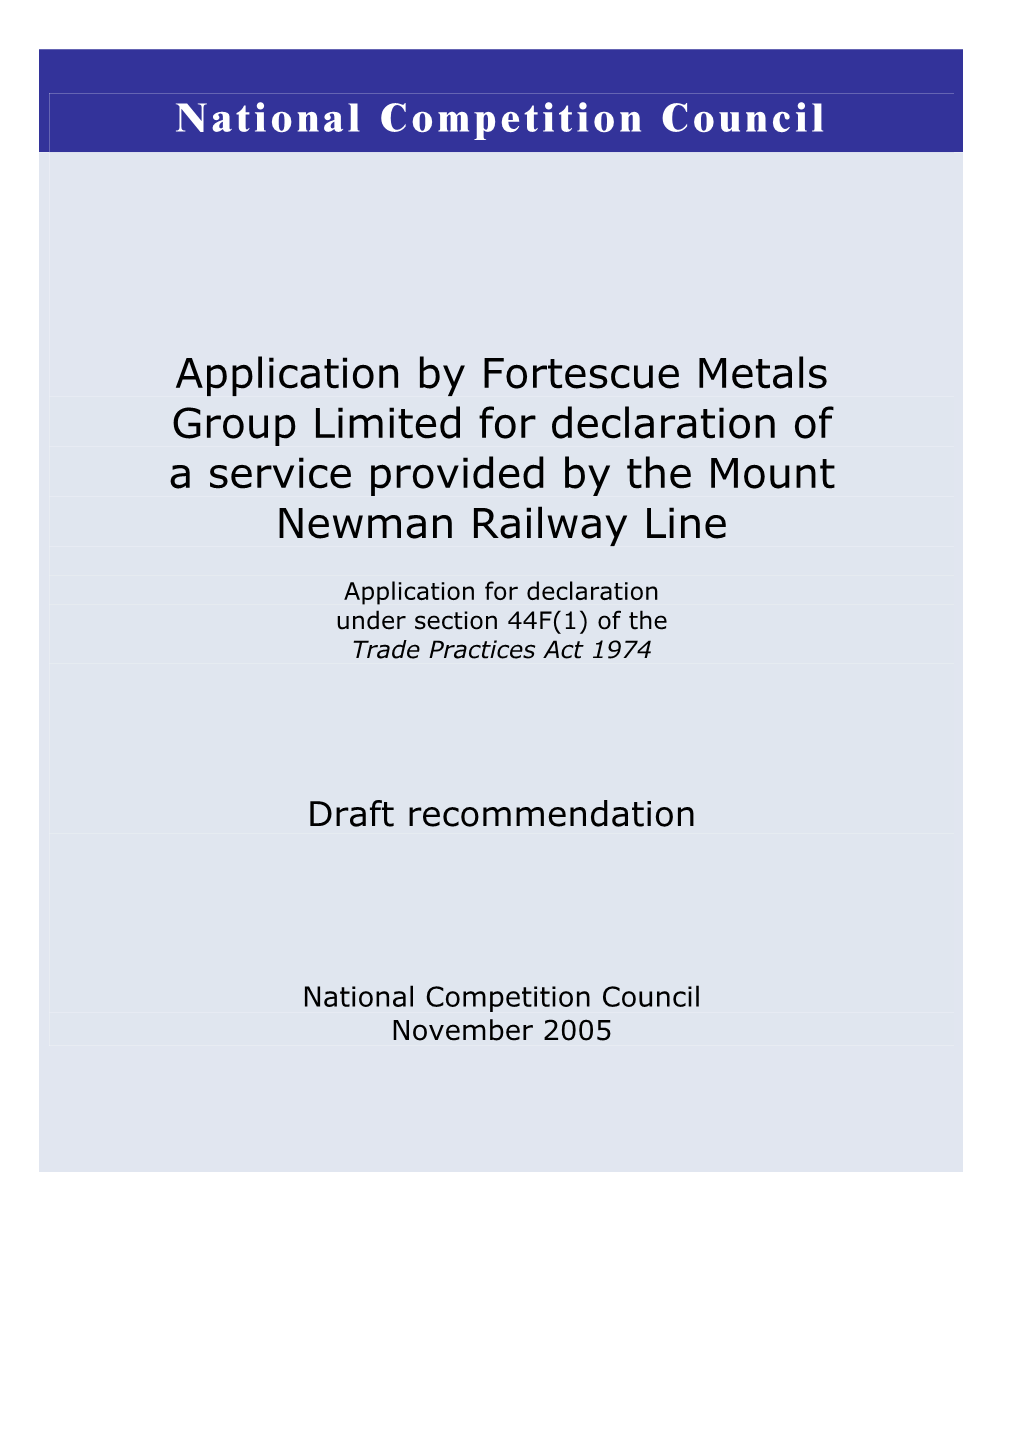 Application for Declaration of the Mt Newman Railway, NCC Draft